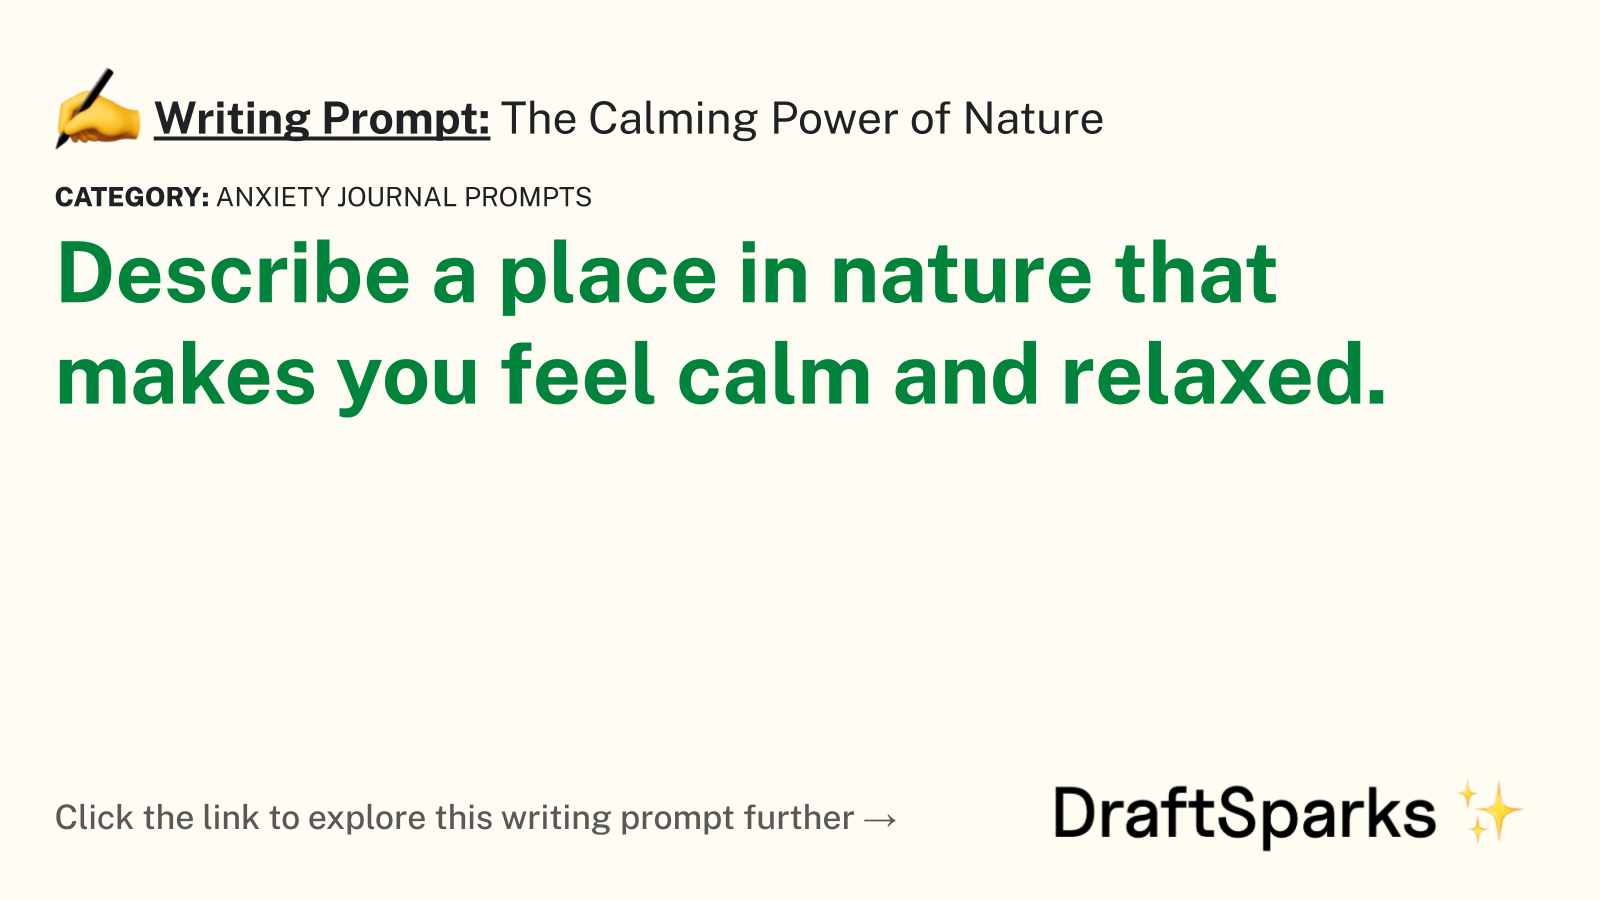 The Calming Power of Nature